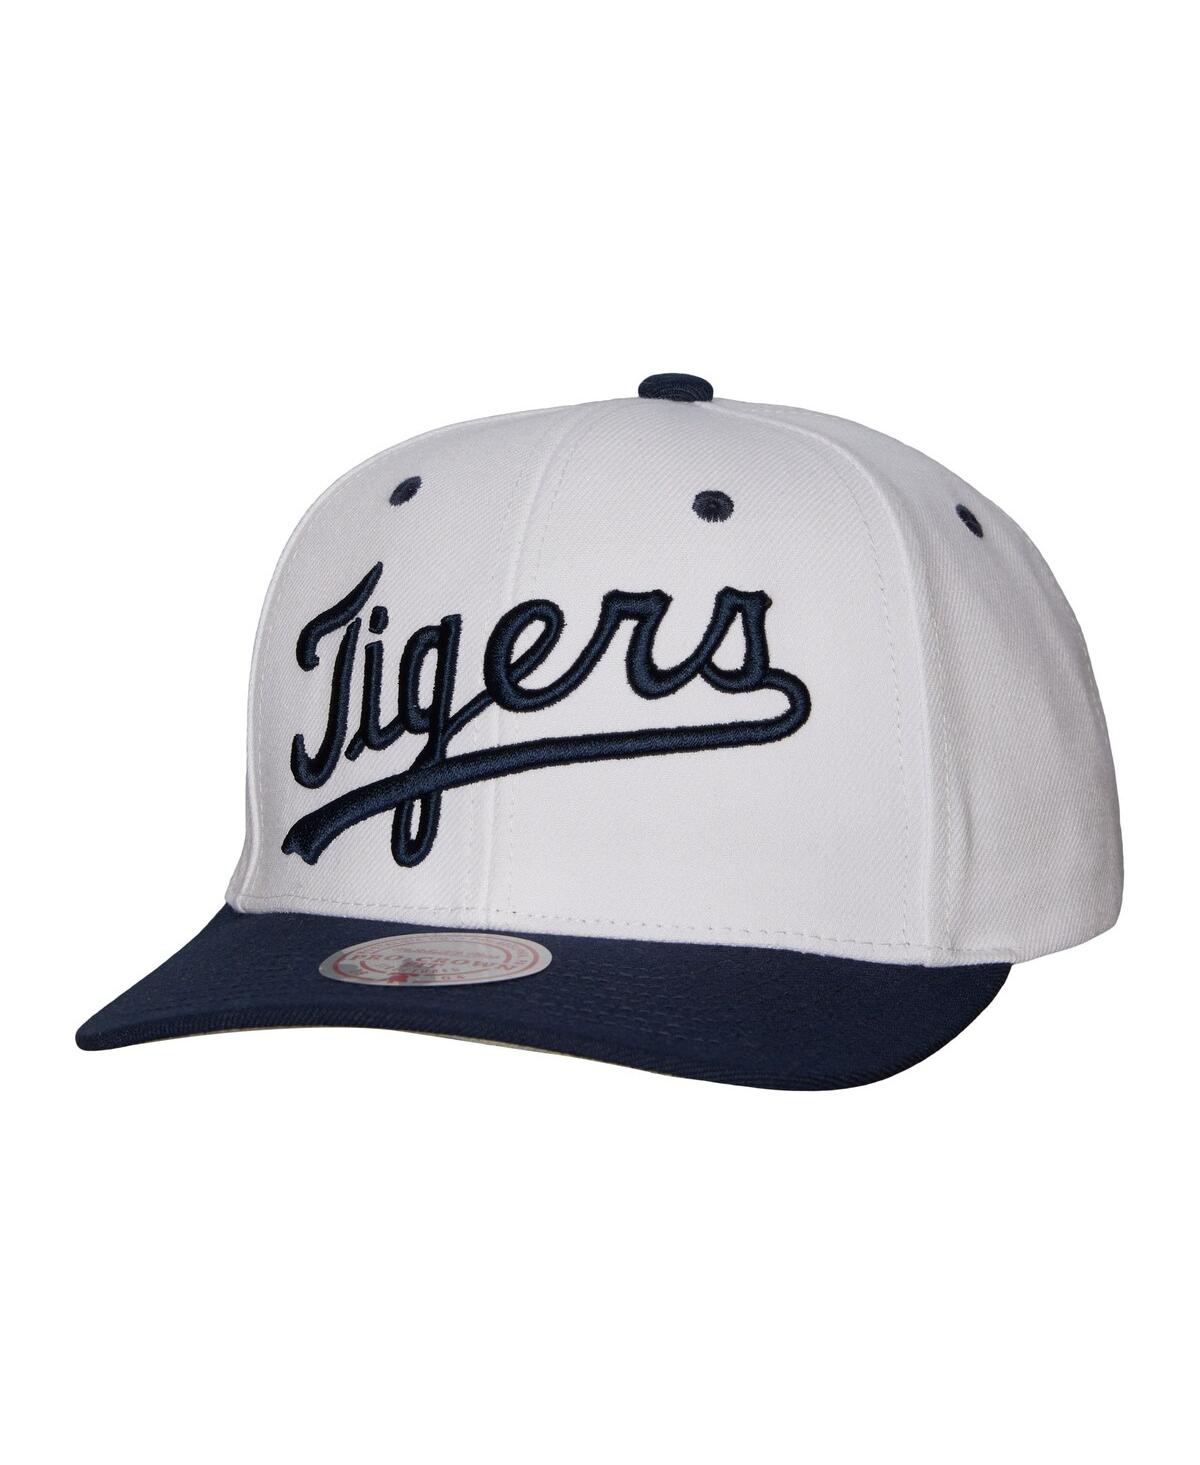 Mitchell & Ness Men's White Detroit Tigers Cooperstown Collection